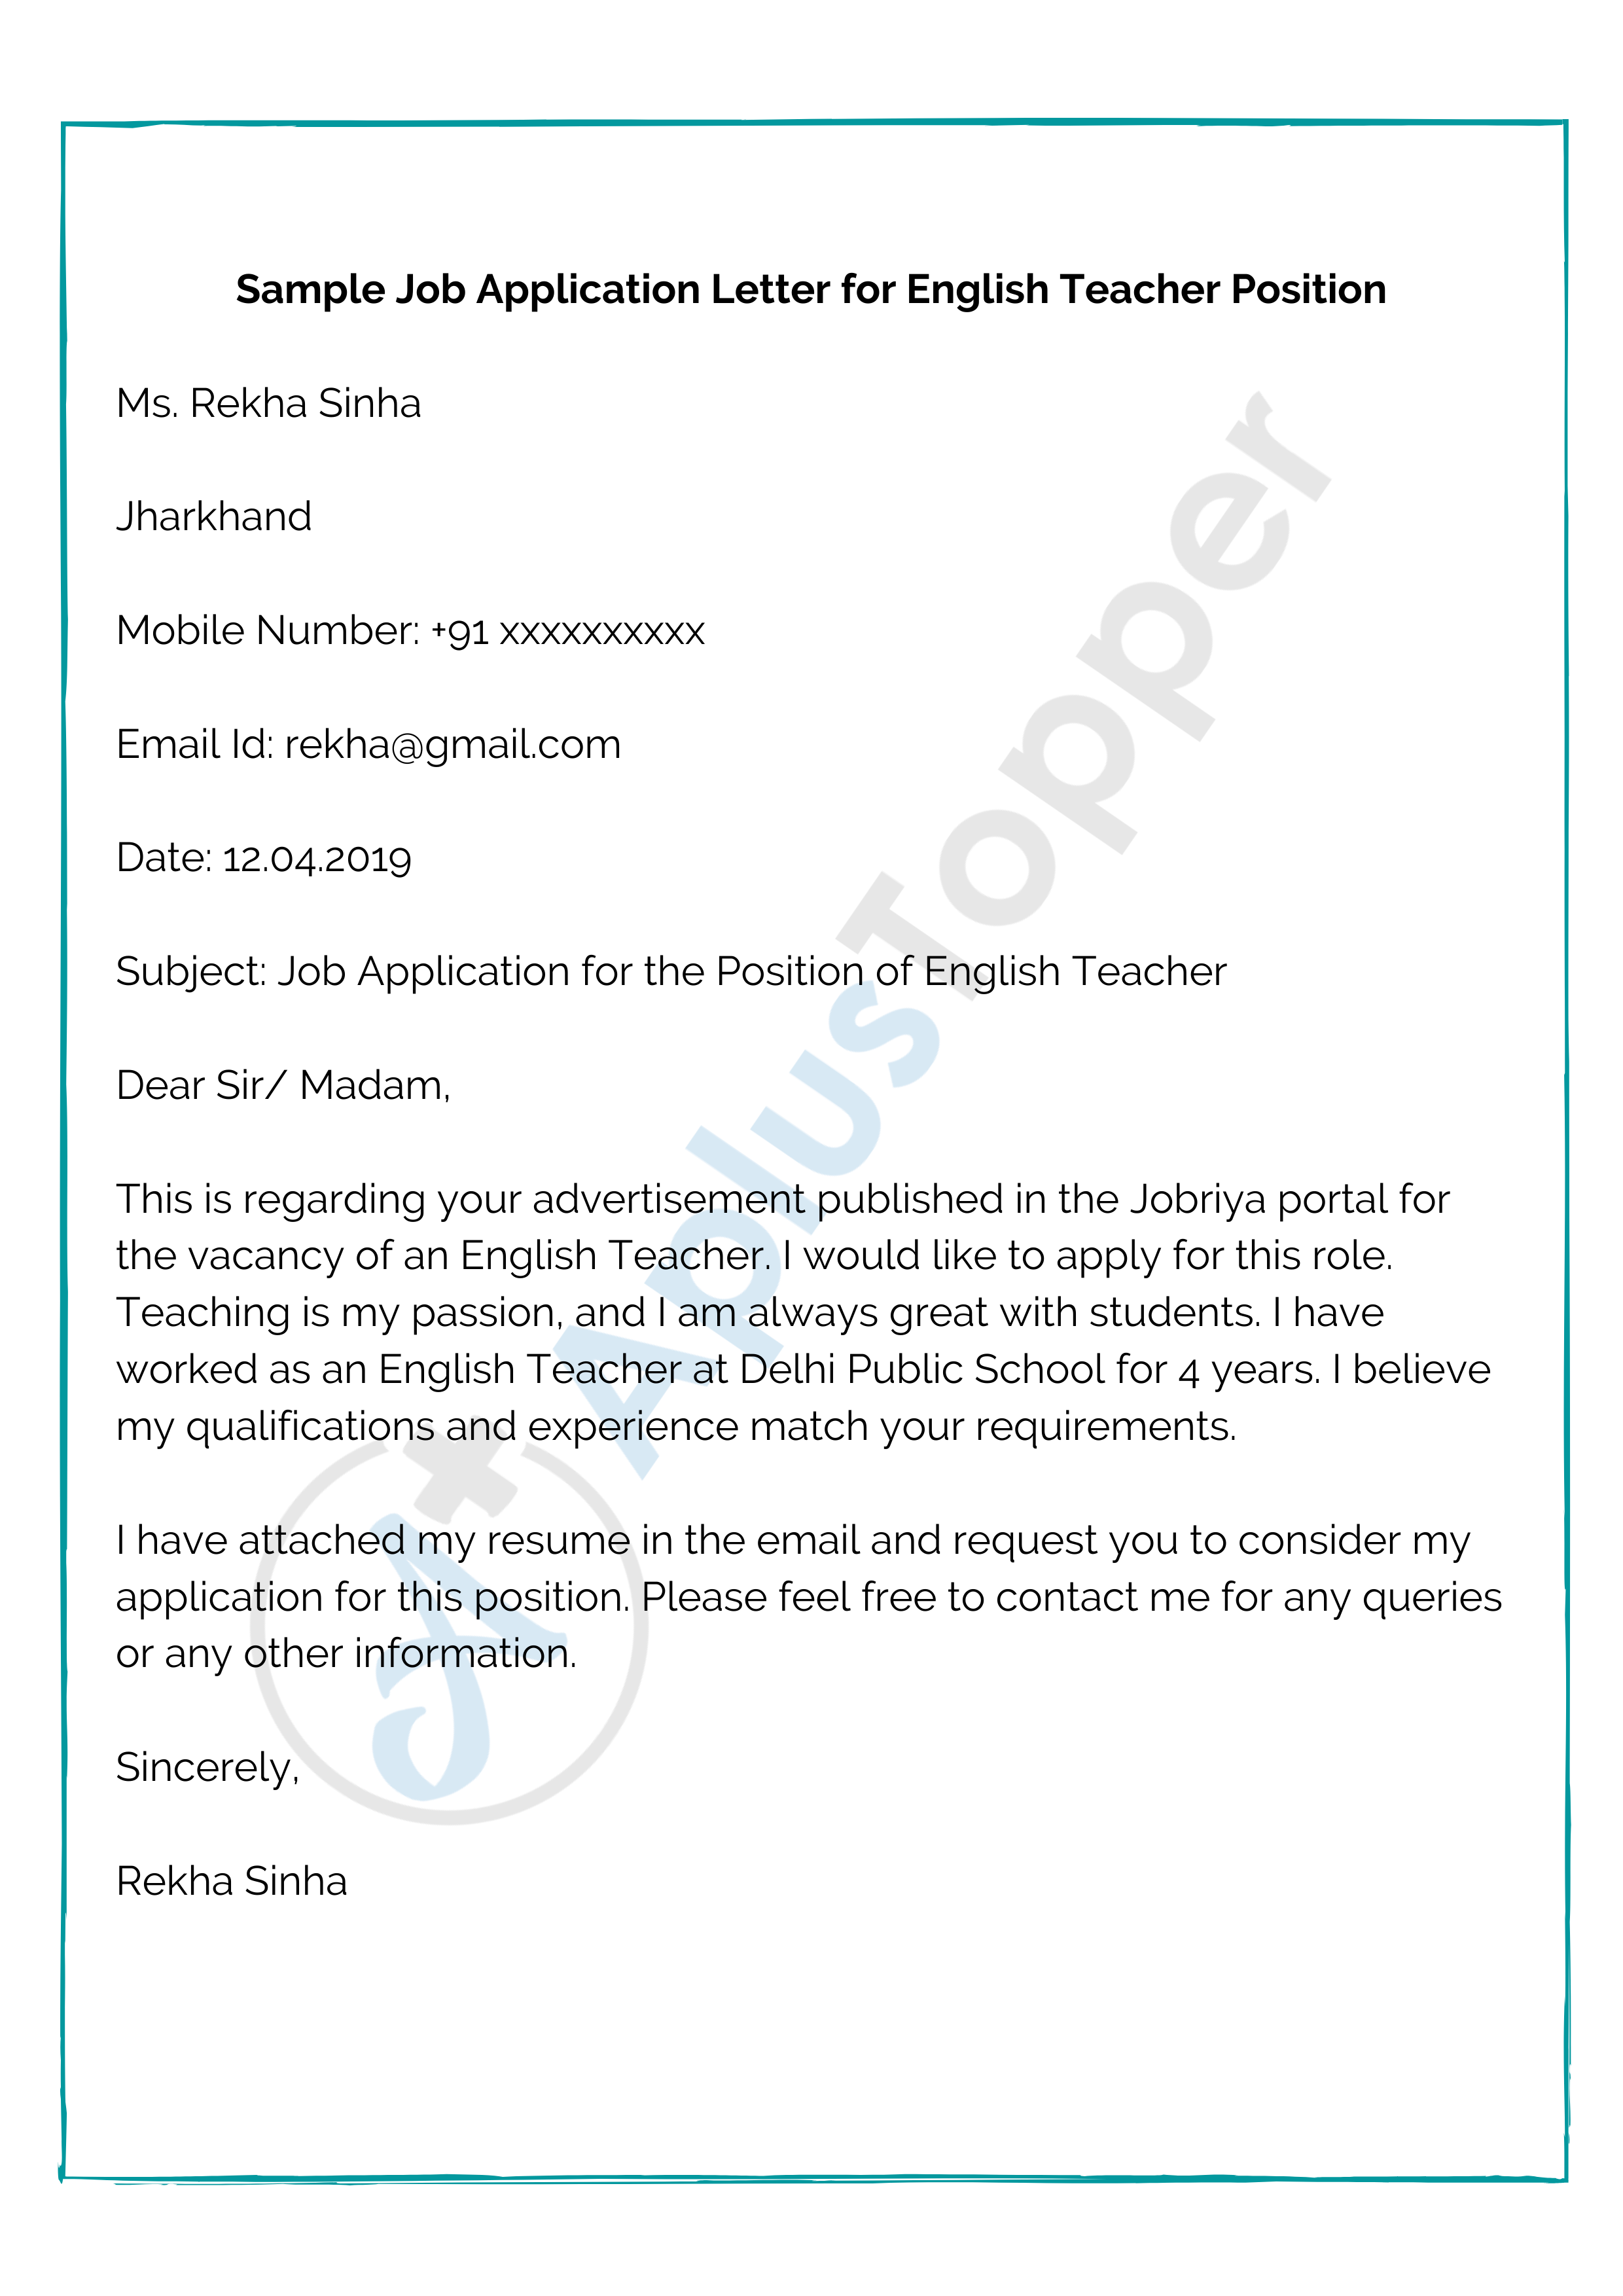 how to write an application letter for a bet9ja job